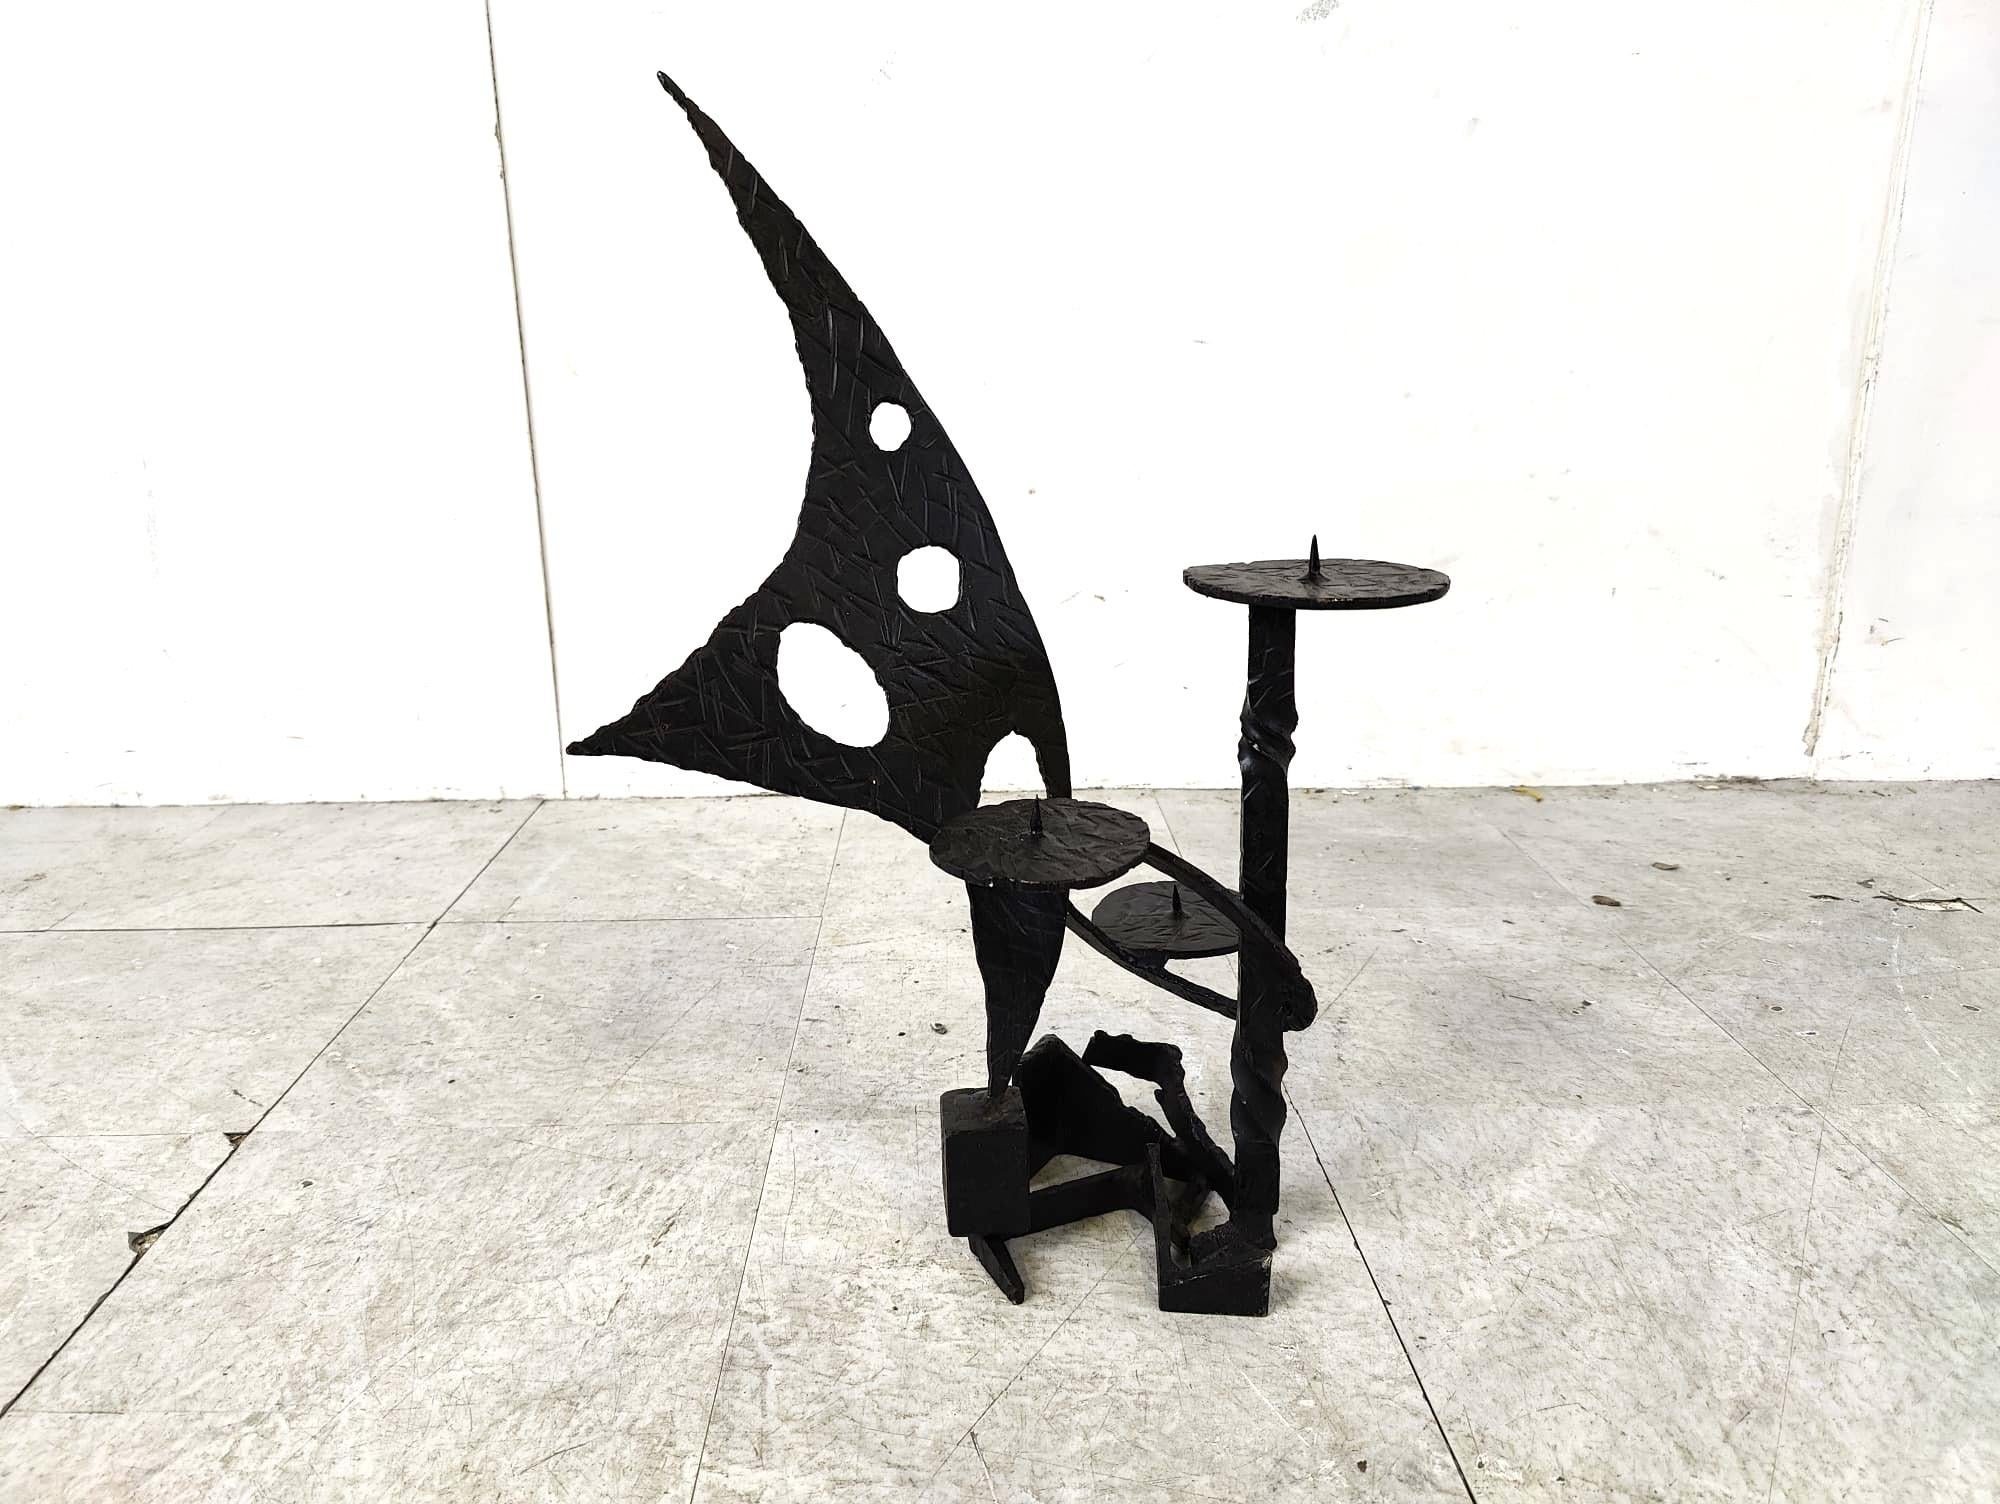 Large brutalist cut steel candle holder for 3 candles.

Beautiful 'brut' design.

Nice decorative piece.

1970s - Germany

Dimension:
Height: 56cm
Width 34cm
Depth: 26cm

Ref: 302551